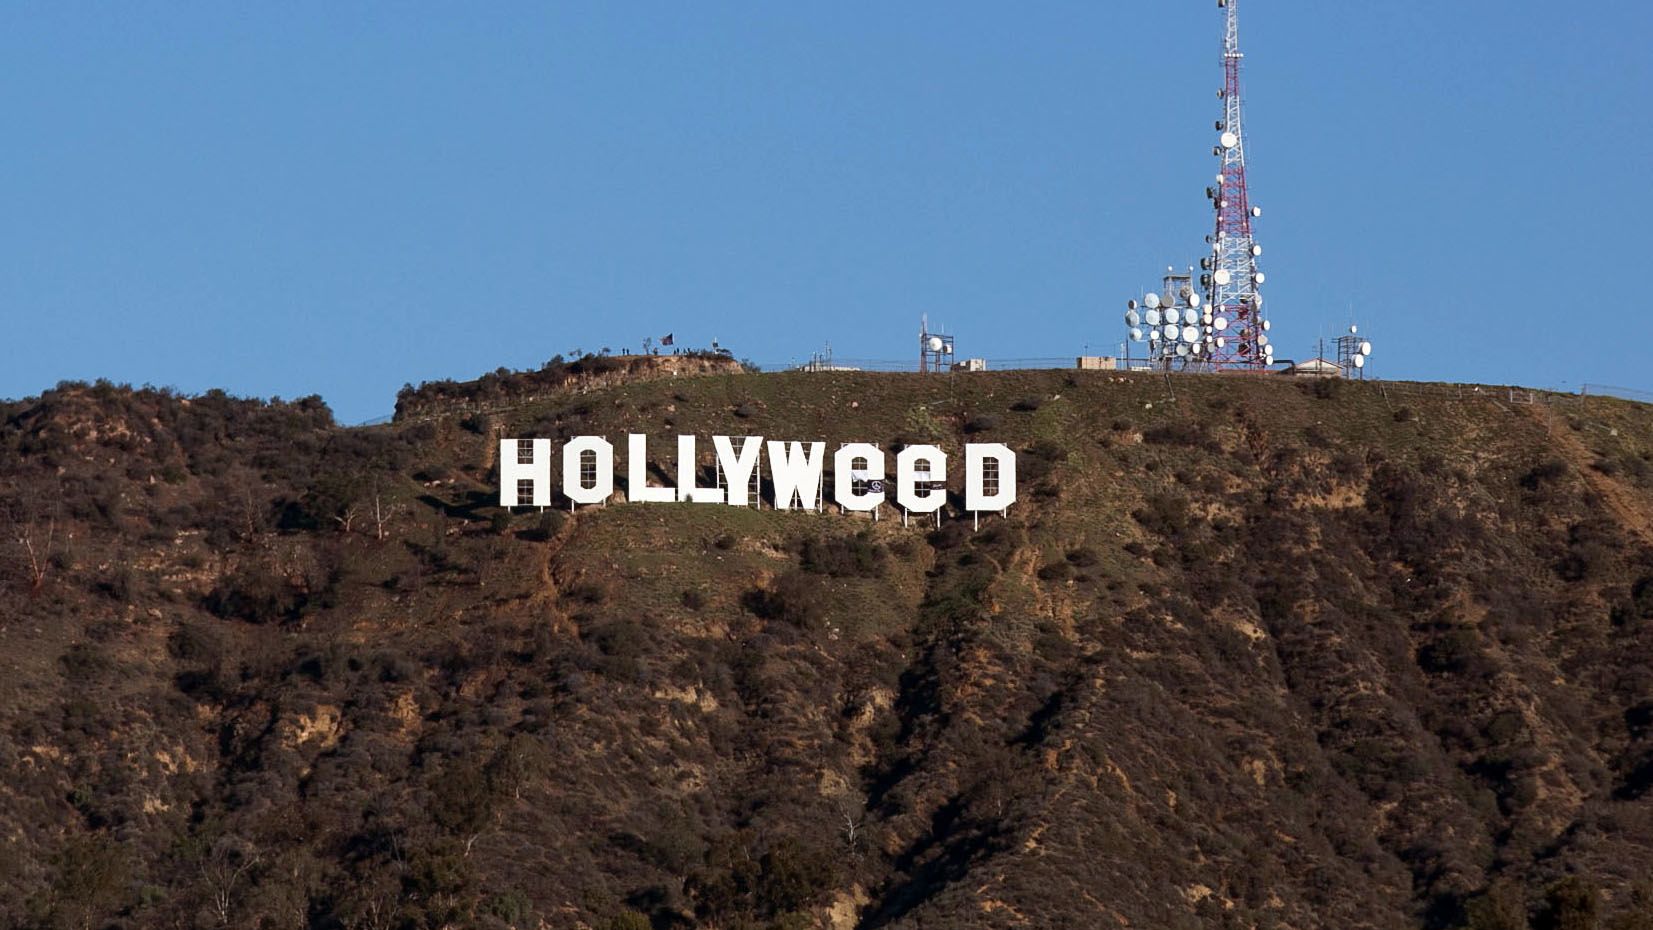 Hollywood sign vandalized to read ‘Hollyweed’ | CNN